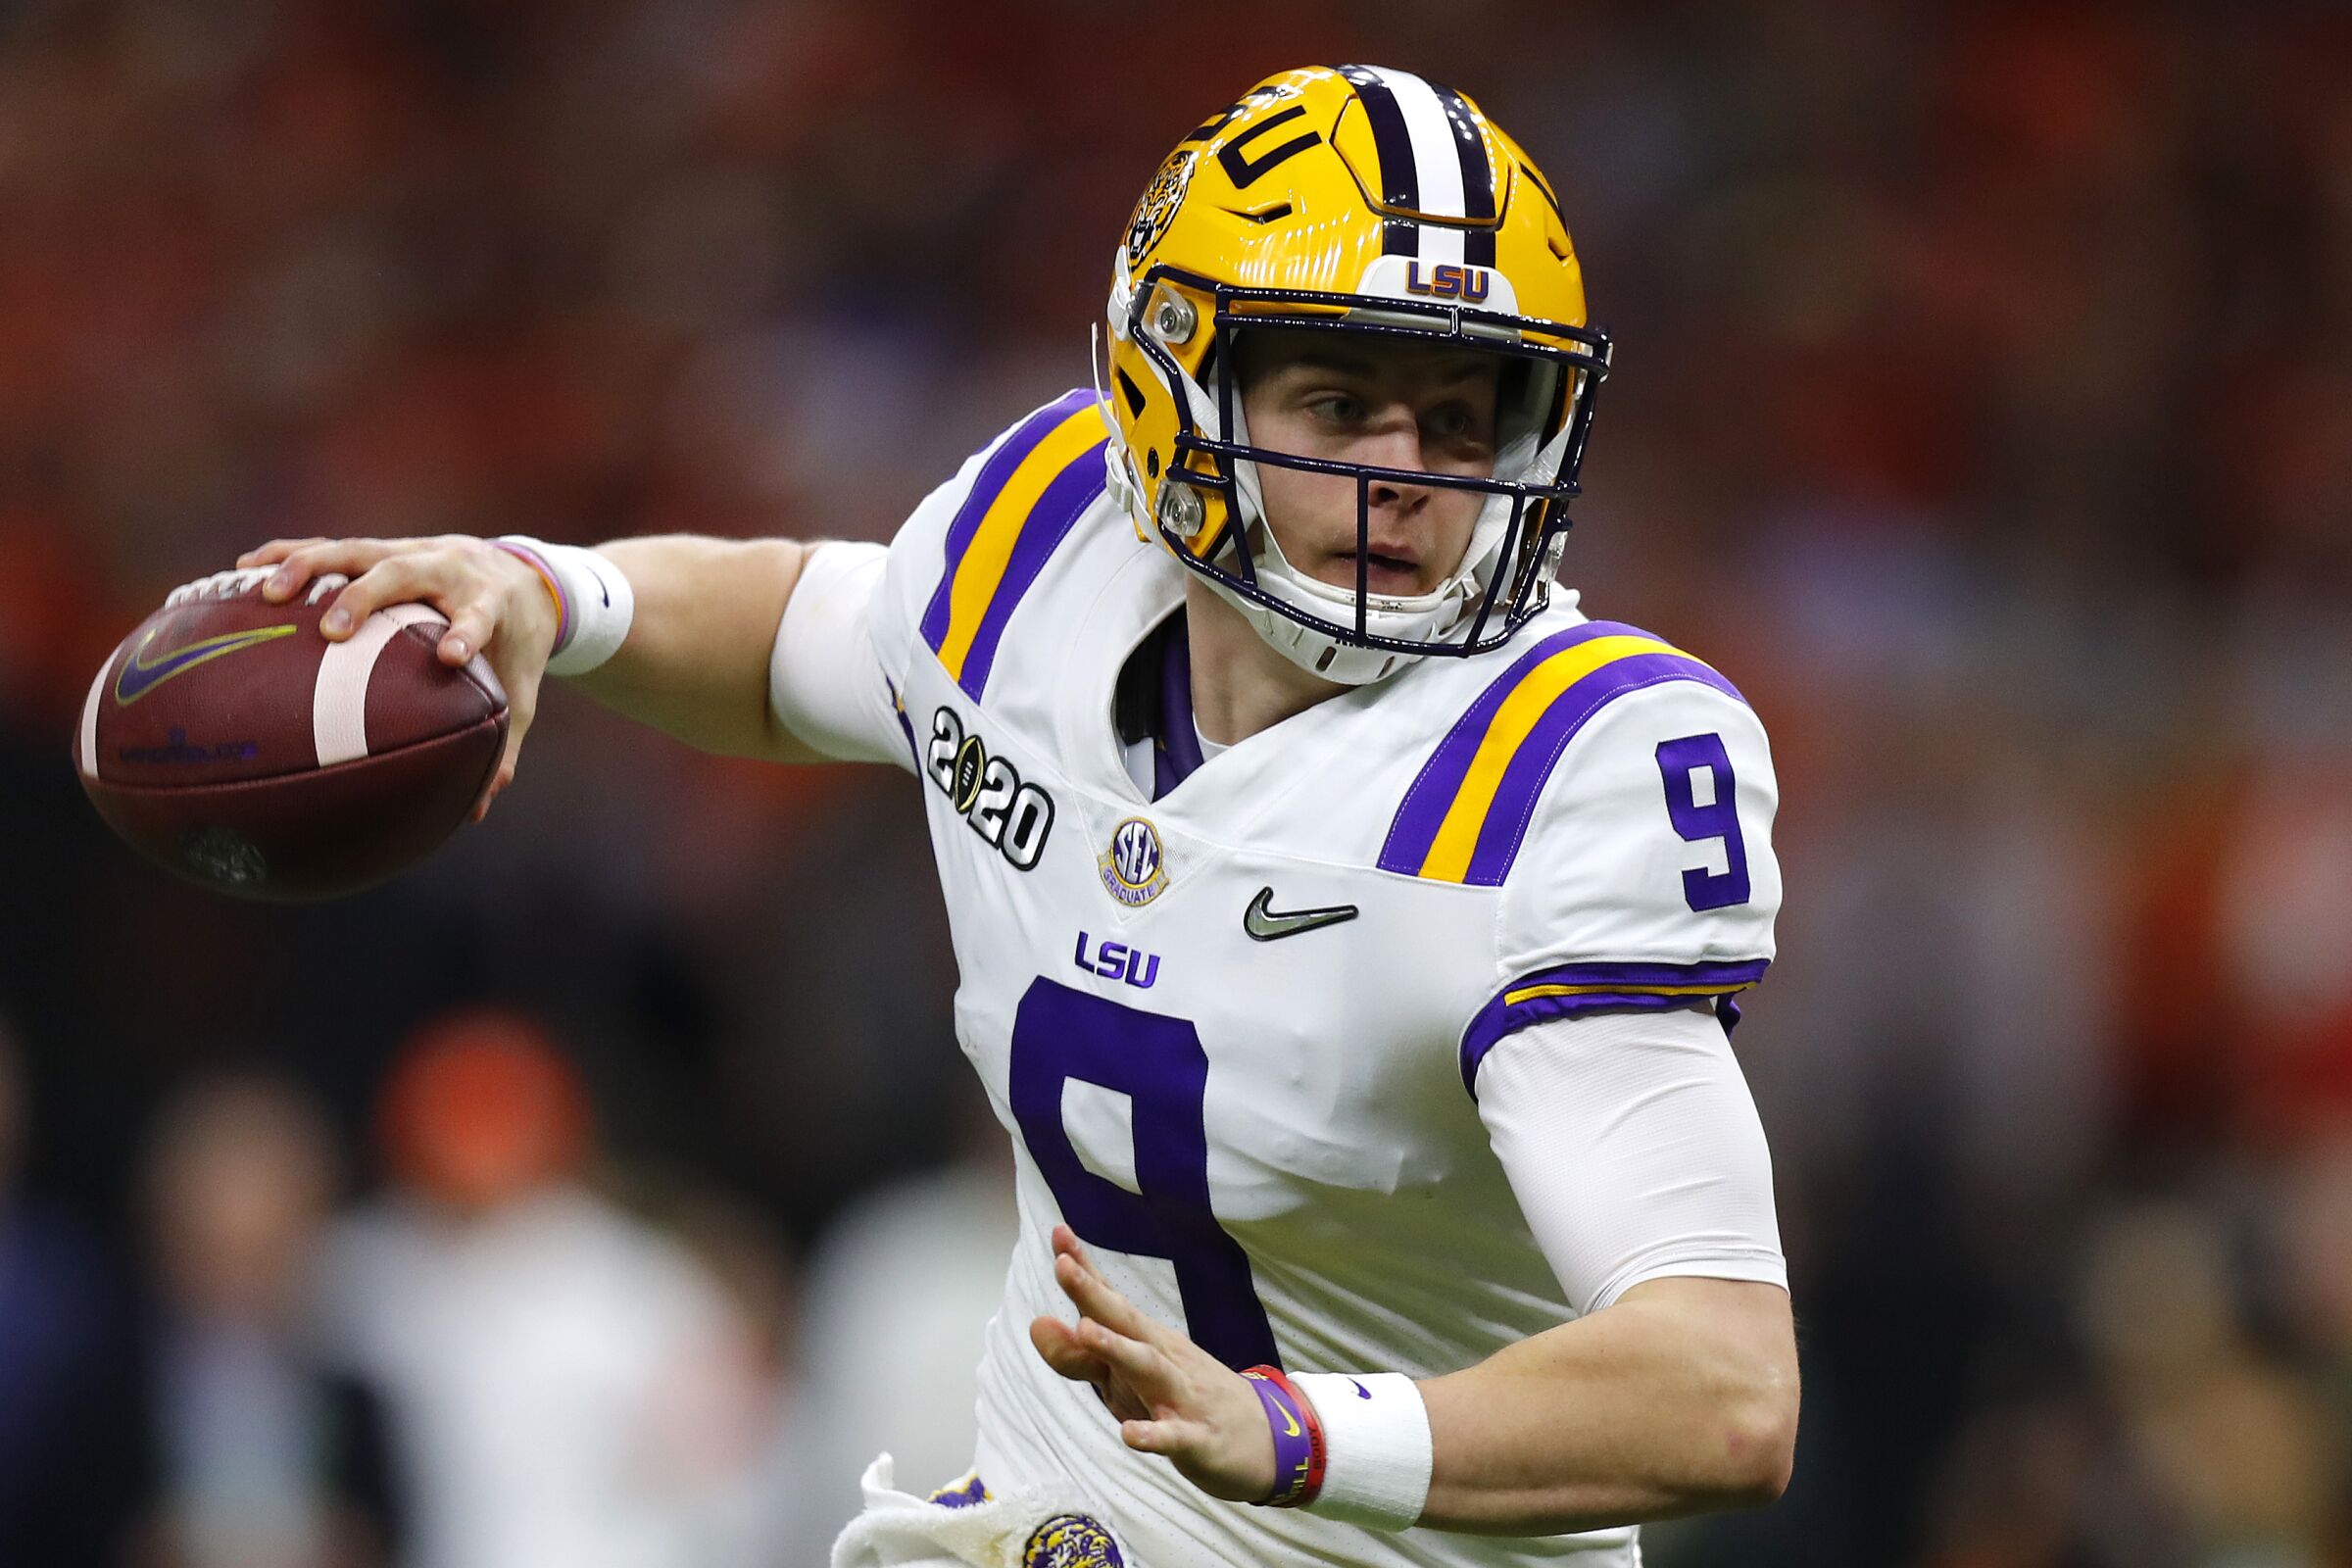 NEW ORLEANS, LOUISIANA - JANUARY 13: Joe Burrow #9 of the LSU Tigers throws the ball under pressure against the Clemson Tigers during the College Football Playoff National Championship game at Mercedes Benz Superdome on January 13, 2020 in New Orleans, Louisiana. (Photo by Jonathan Bachman/Getty Images)